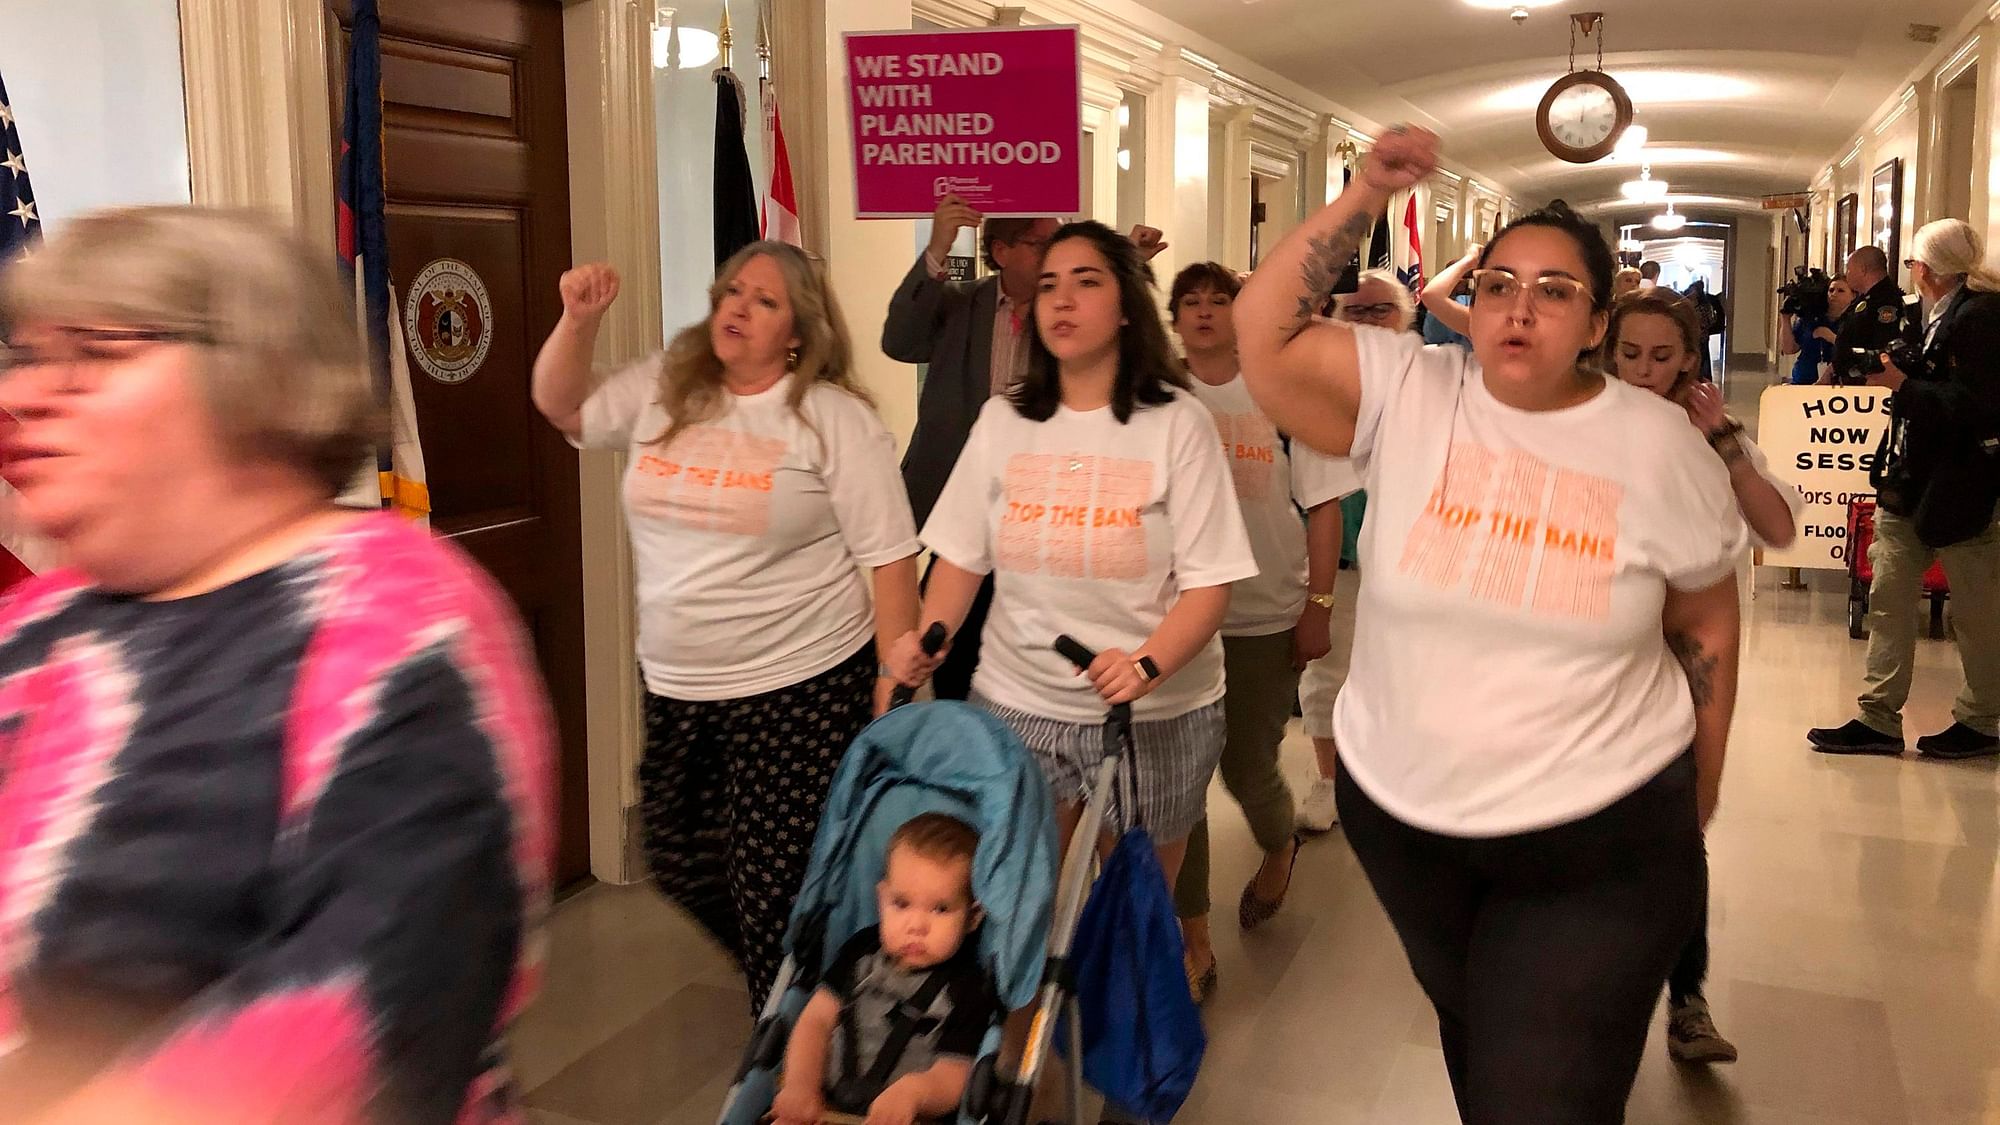 Protesters march through the halls of the Missouri Capitol outside the House chamber on Friday, May 17, 2019, in Jefferson City, Missouri, in opposition to legislation prohibiting abortions at eight weeks of pregnancy.